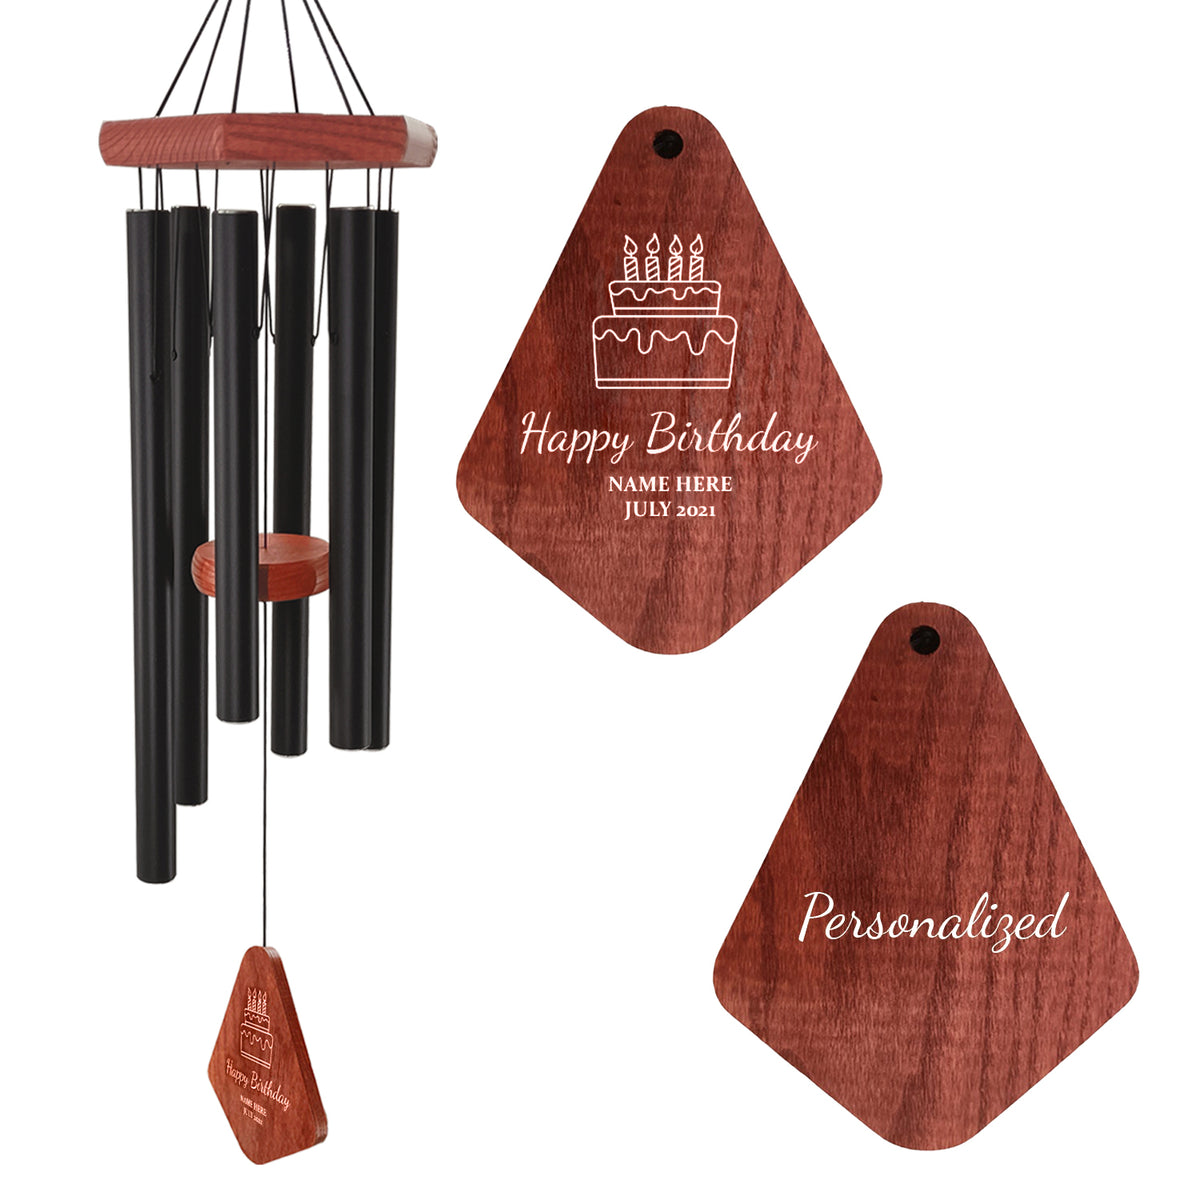 Personalized Birthday Gift Wind Chimes -24/30/36 inches, 6 Tubes, 5 Colors-Birthday Gift